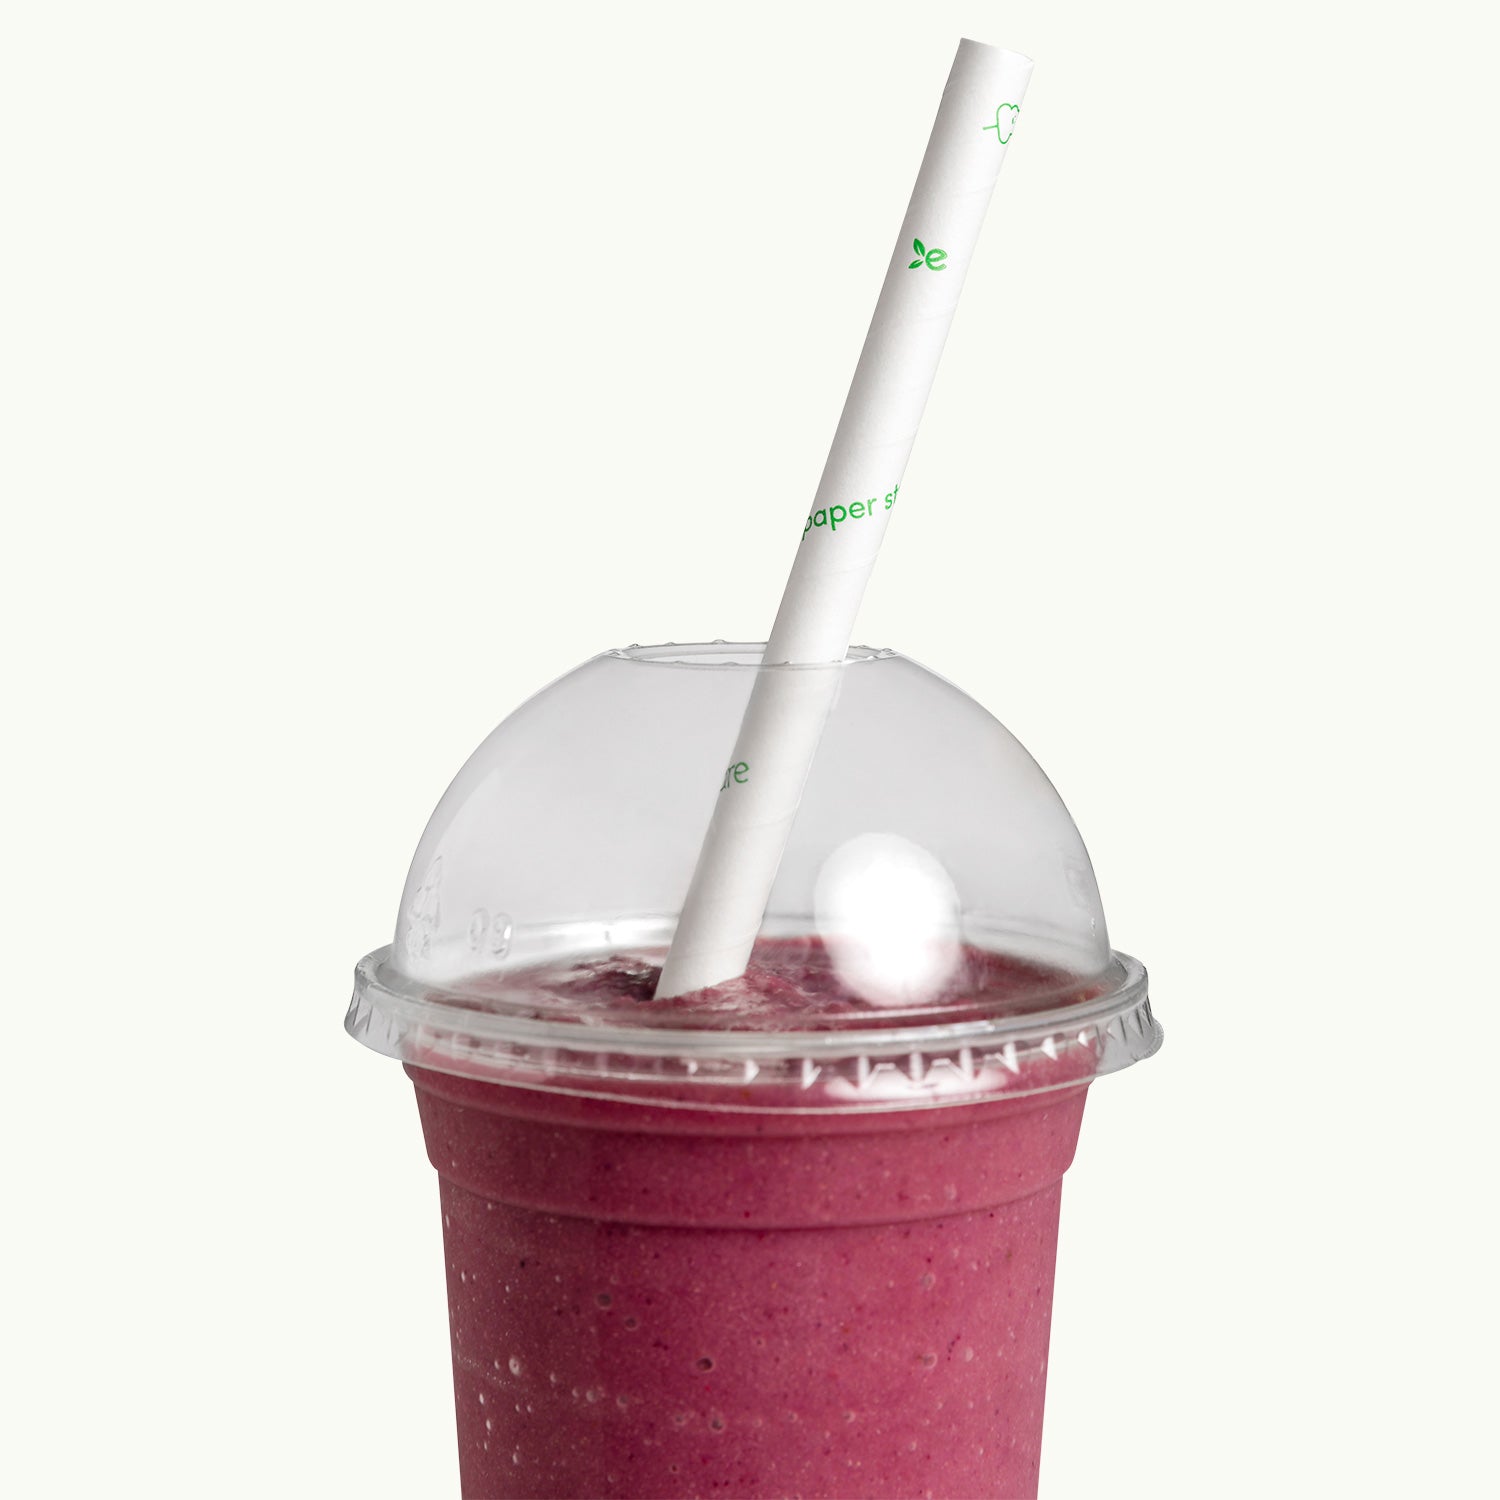 Made for thick shakes and smoothies, our jumbo paper straws are 3-ply, 197mm long with a 10mm diameter